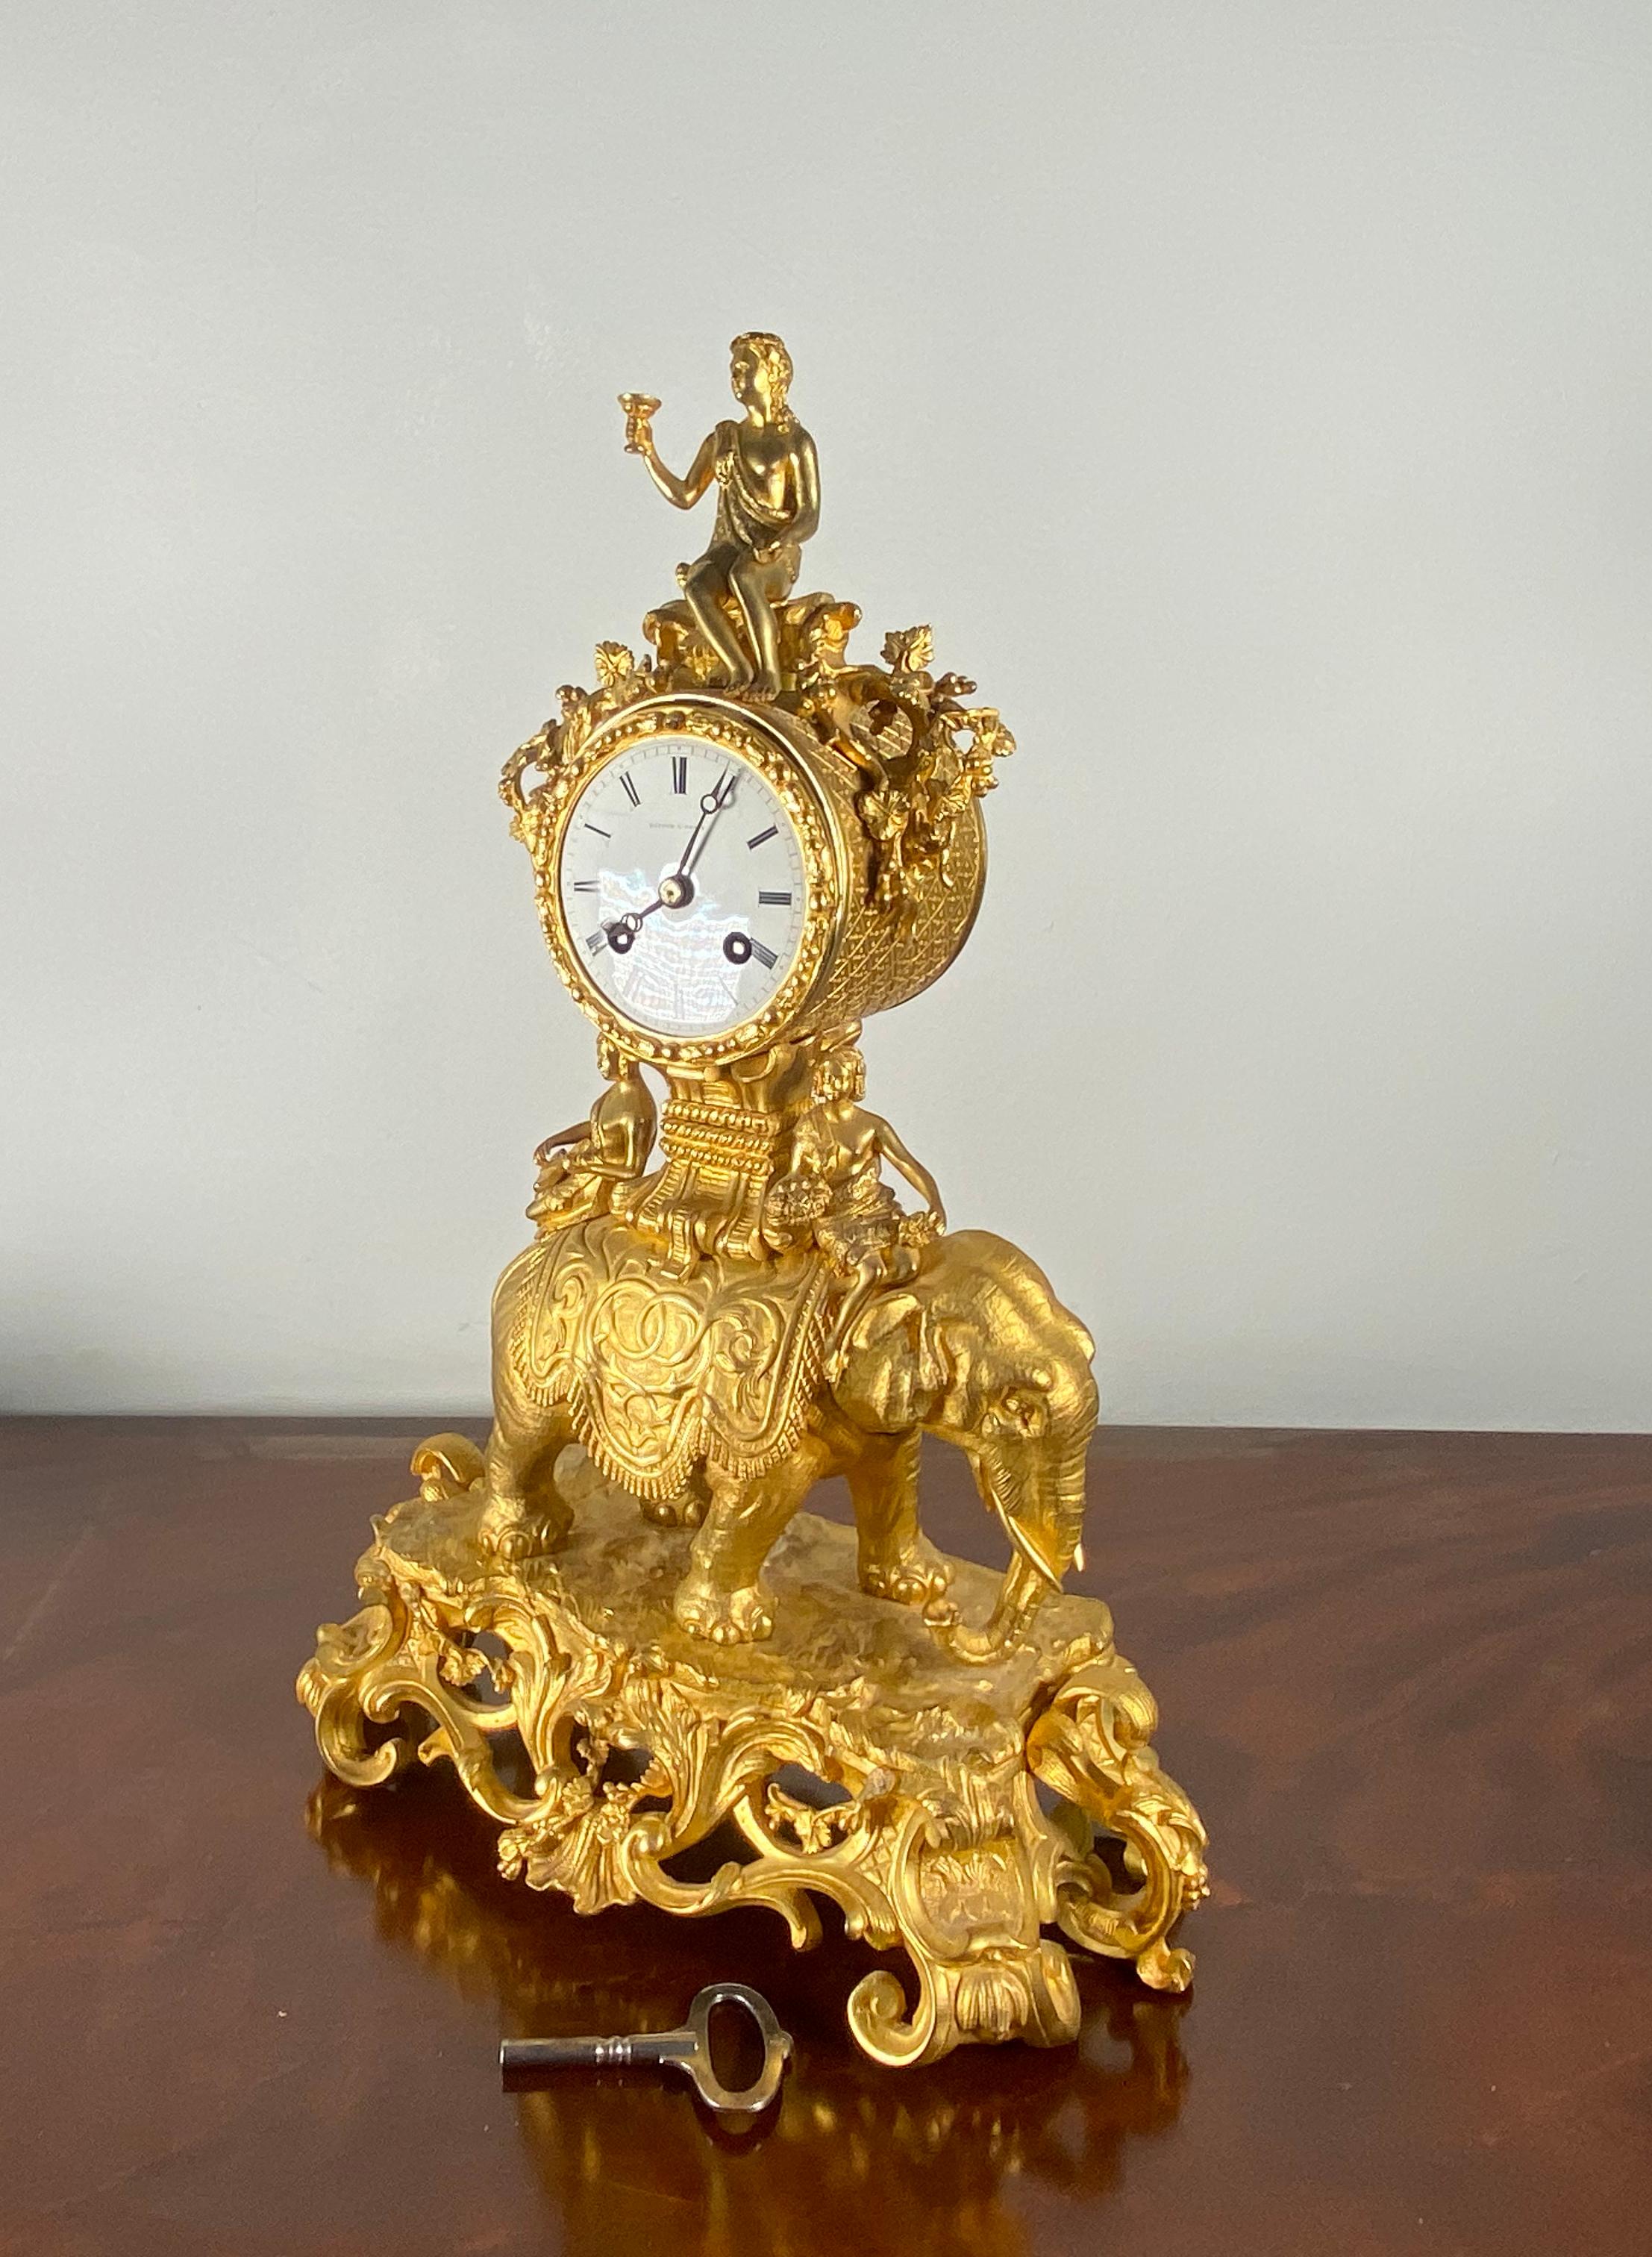 A wonderful mid 19th century Empire Clock
having white enamel dial with Roman numerals, the dial signed 'Hatton A Paris' surmounted and flanked by female figures, on a rocaille base.